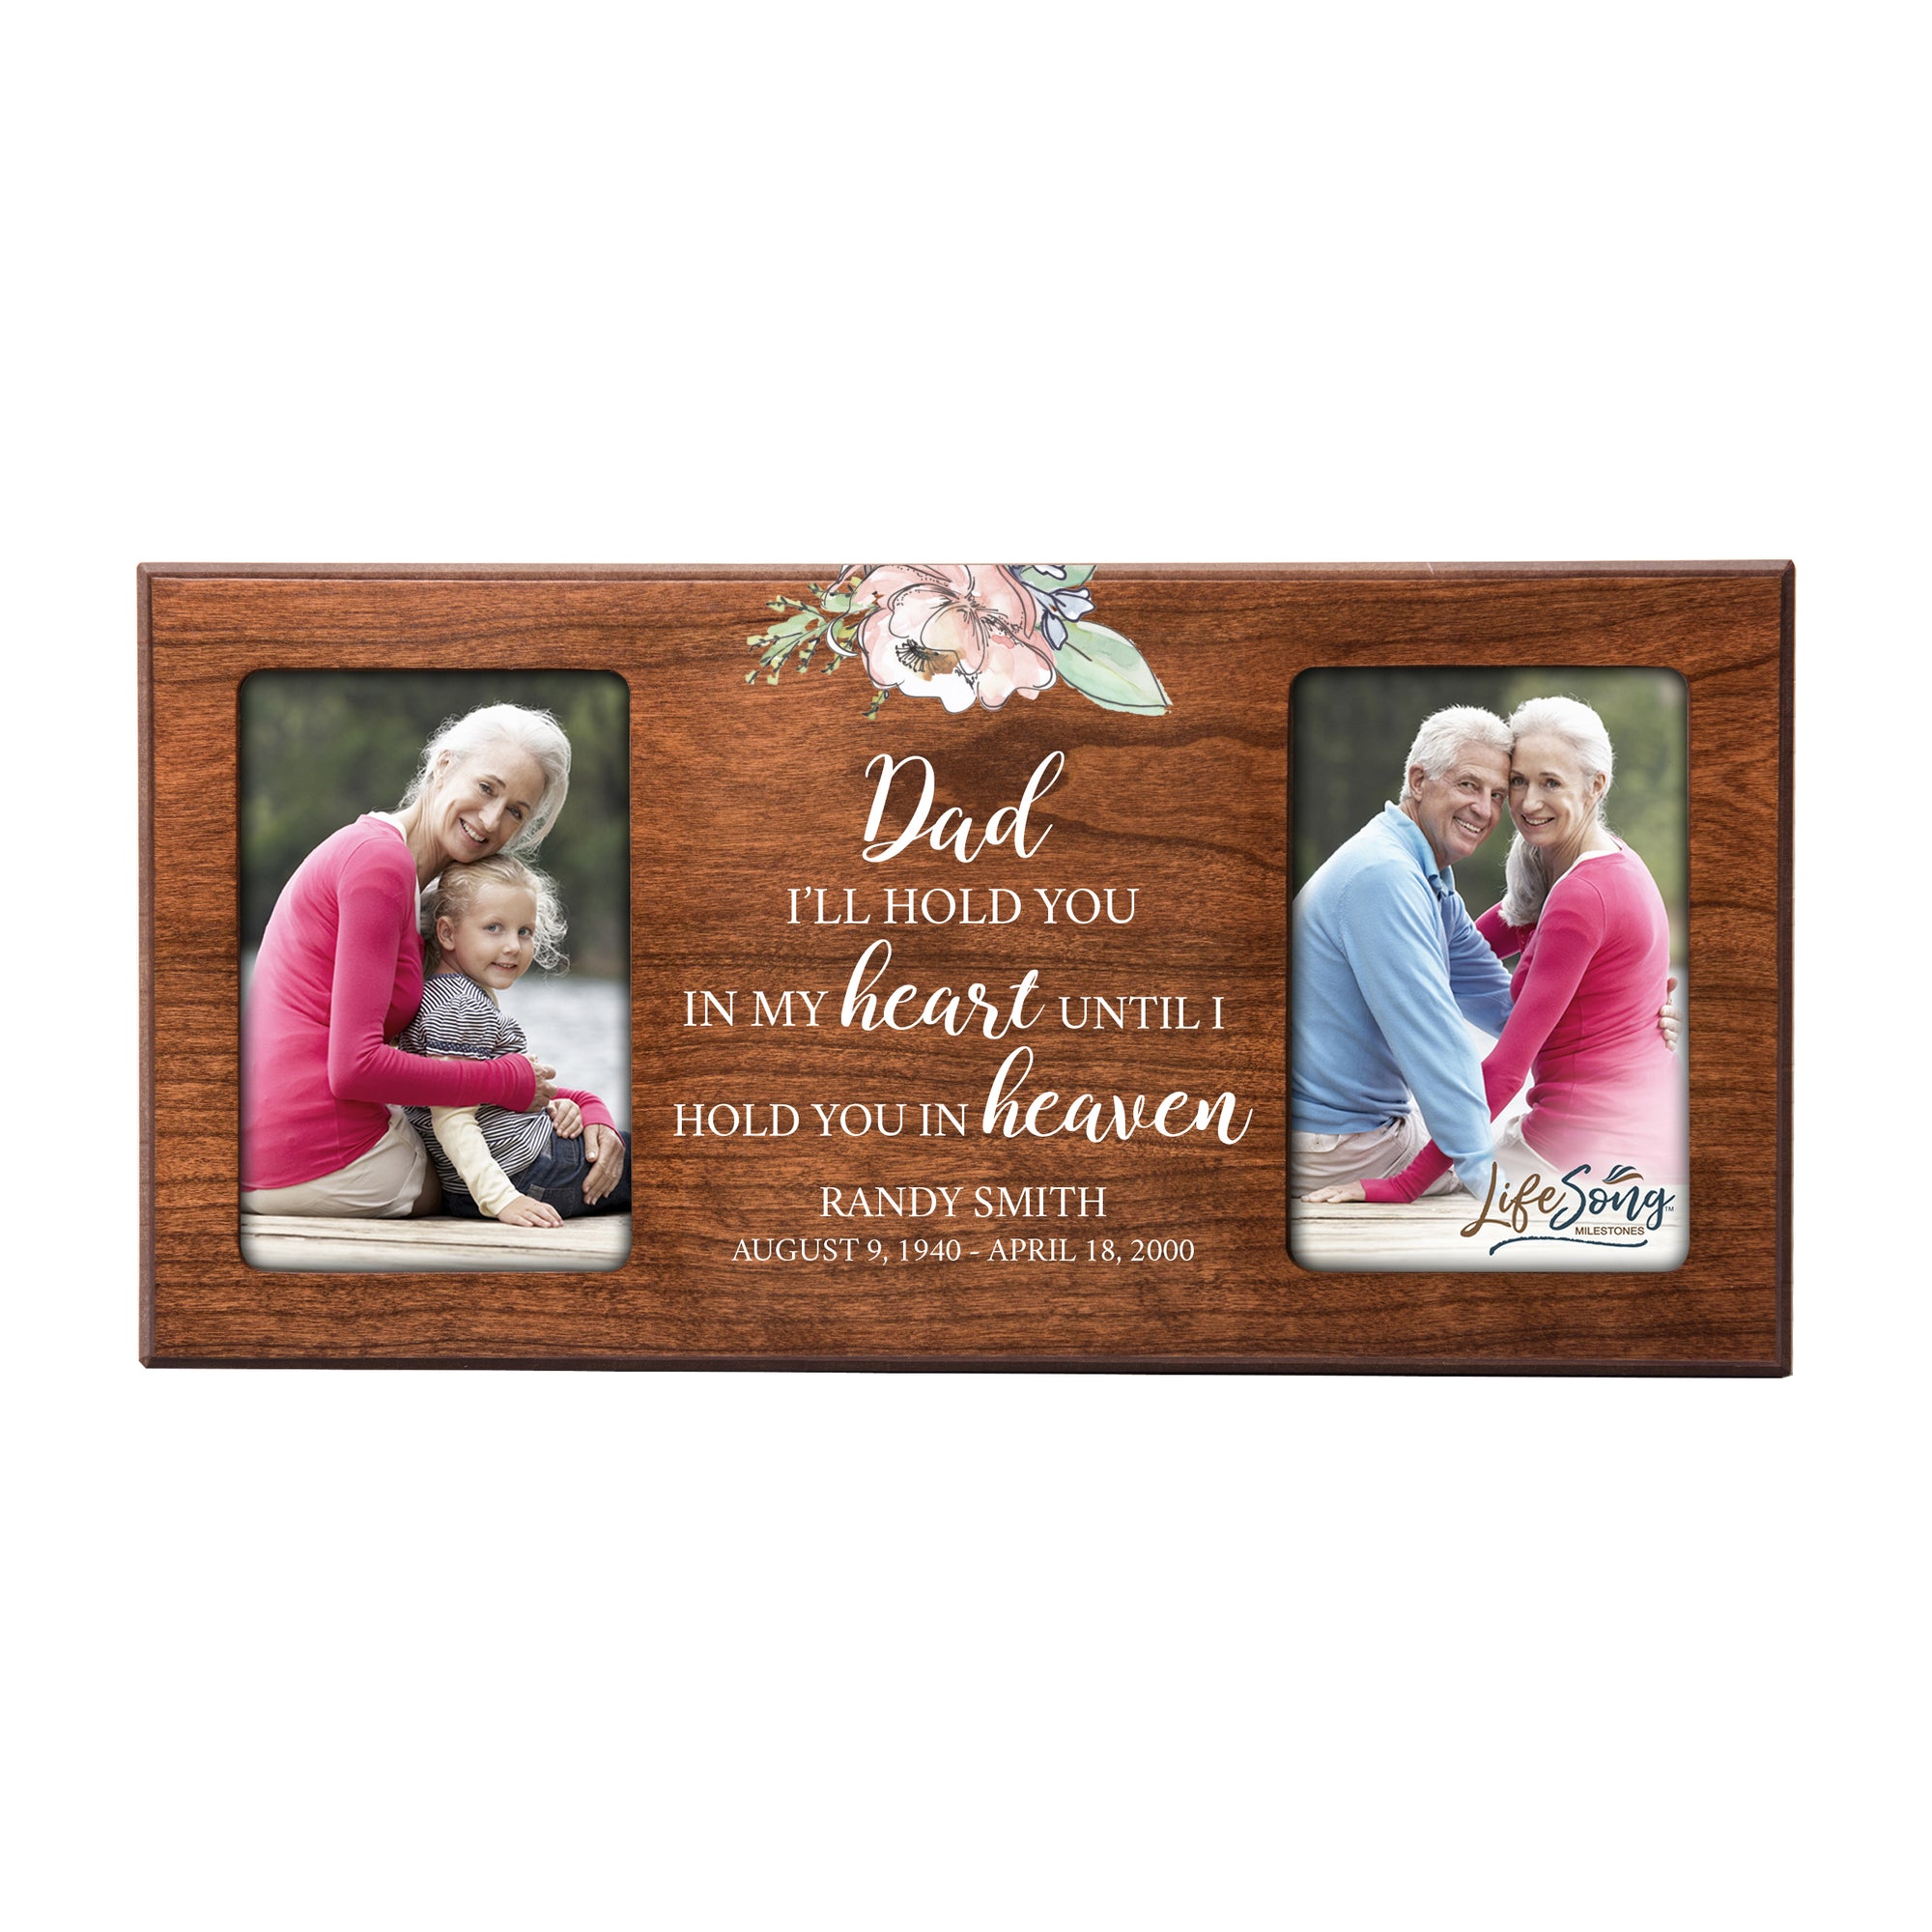 Custom Memorial Picture Frame 16x8in Holds Two 4x6in Photos - Dad, I’ll Hold You In My